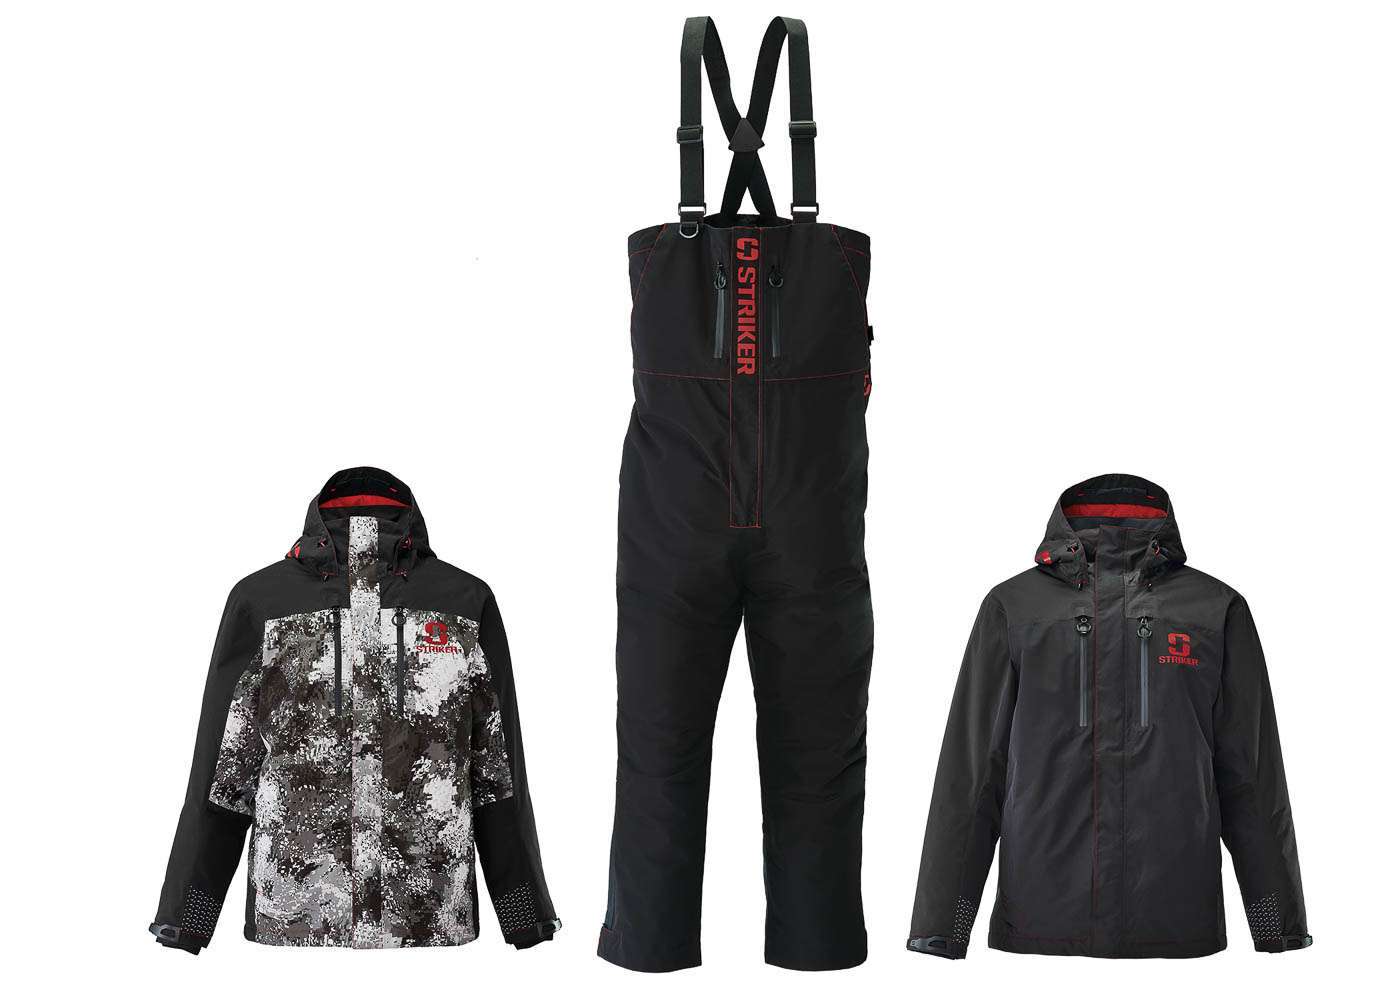 <p><strong>Striker Denali Insulated Rain Suit</strong></p><p>The Denali features body-mapped Primaloft Silver insulation with a unique HeatMap reflective ceramic lining. A Hydrapore Pro Waterproof 10,000mm/Breathable 10,000g rating provides a durable barrier of protection in wet or snowy conditions. A 3-point adjustable hood and internal neoprene cuffs lock out the elements completely in challenging conditions. Waist-high zippers and an adjustable waist cinch feature allow for custom fit, while preventing shoulder fatigue from fishing all day. Also available in tall and extended sizes. From $599.99, or $299.99 for the jacket; $299.99 for bib. <a href=